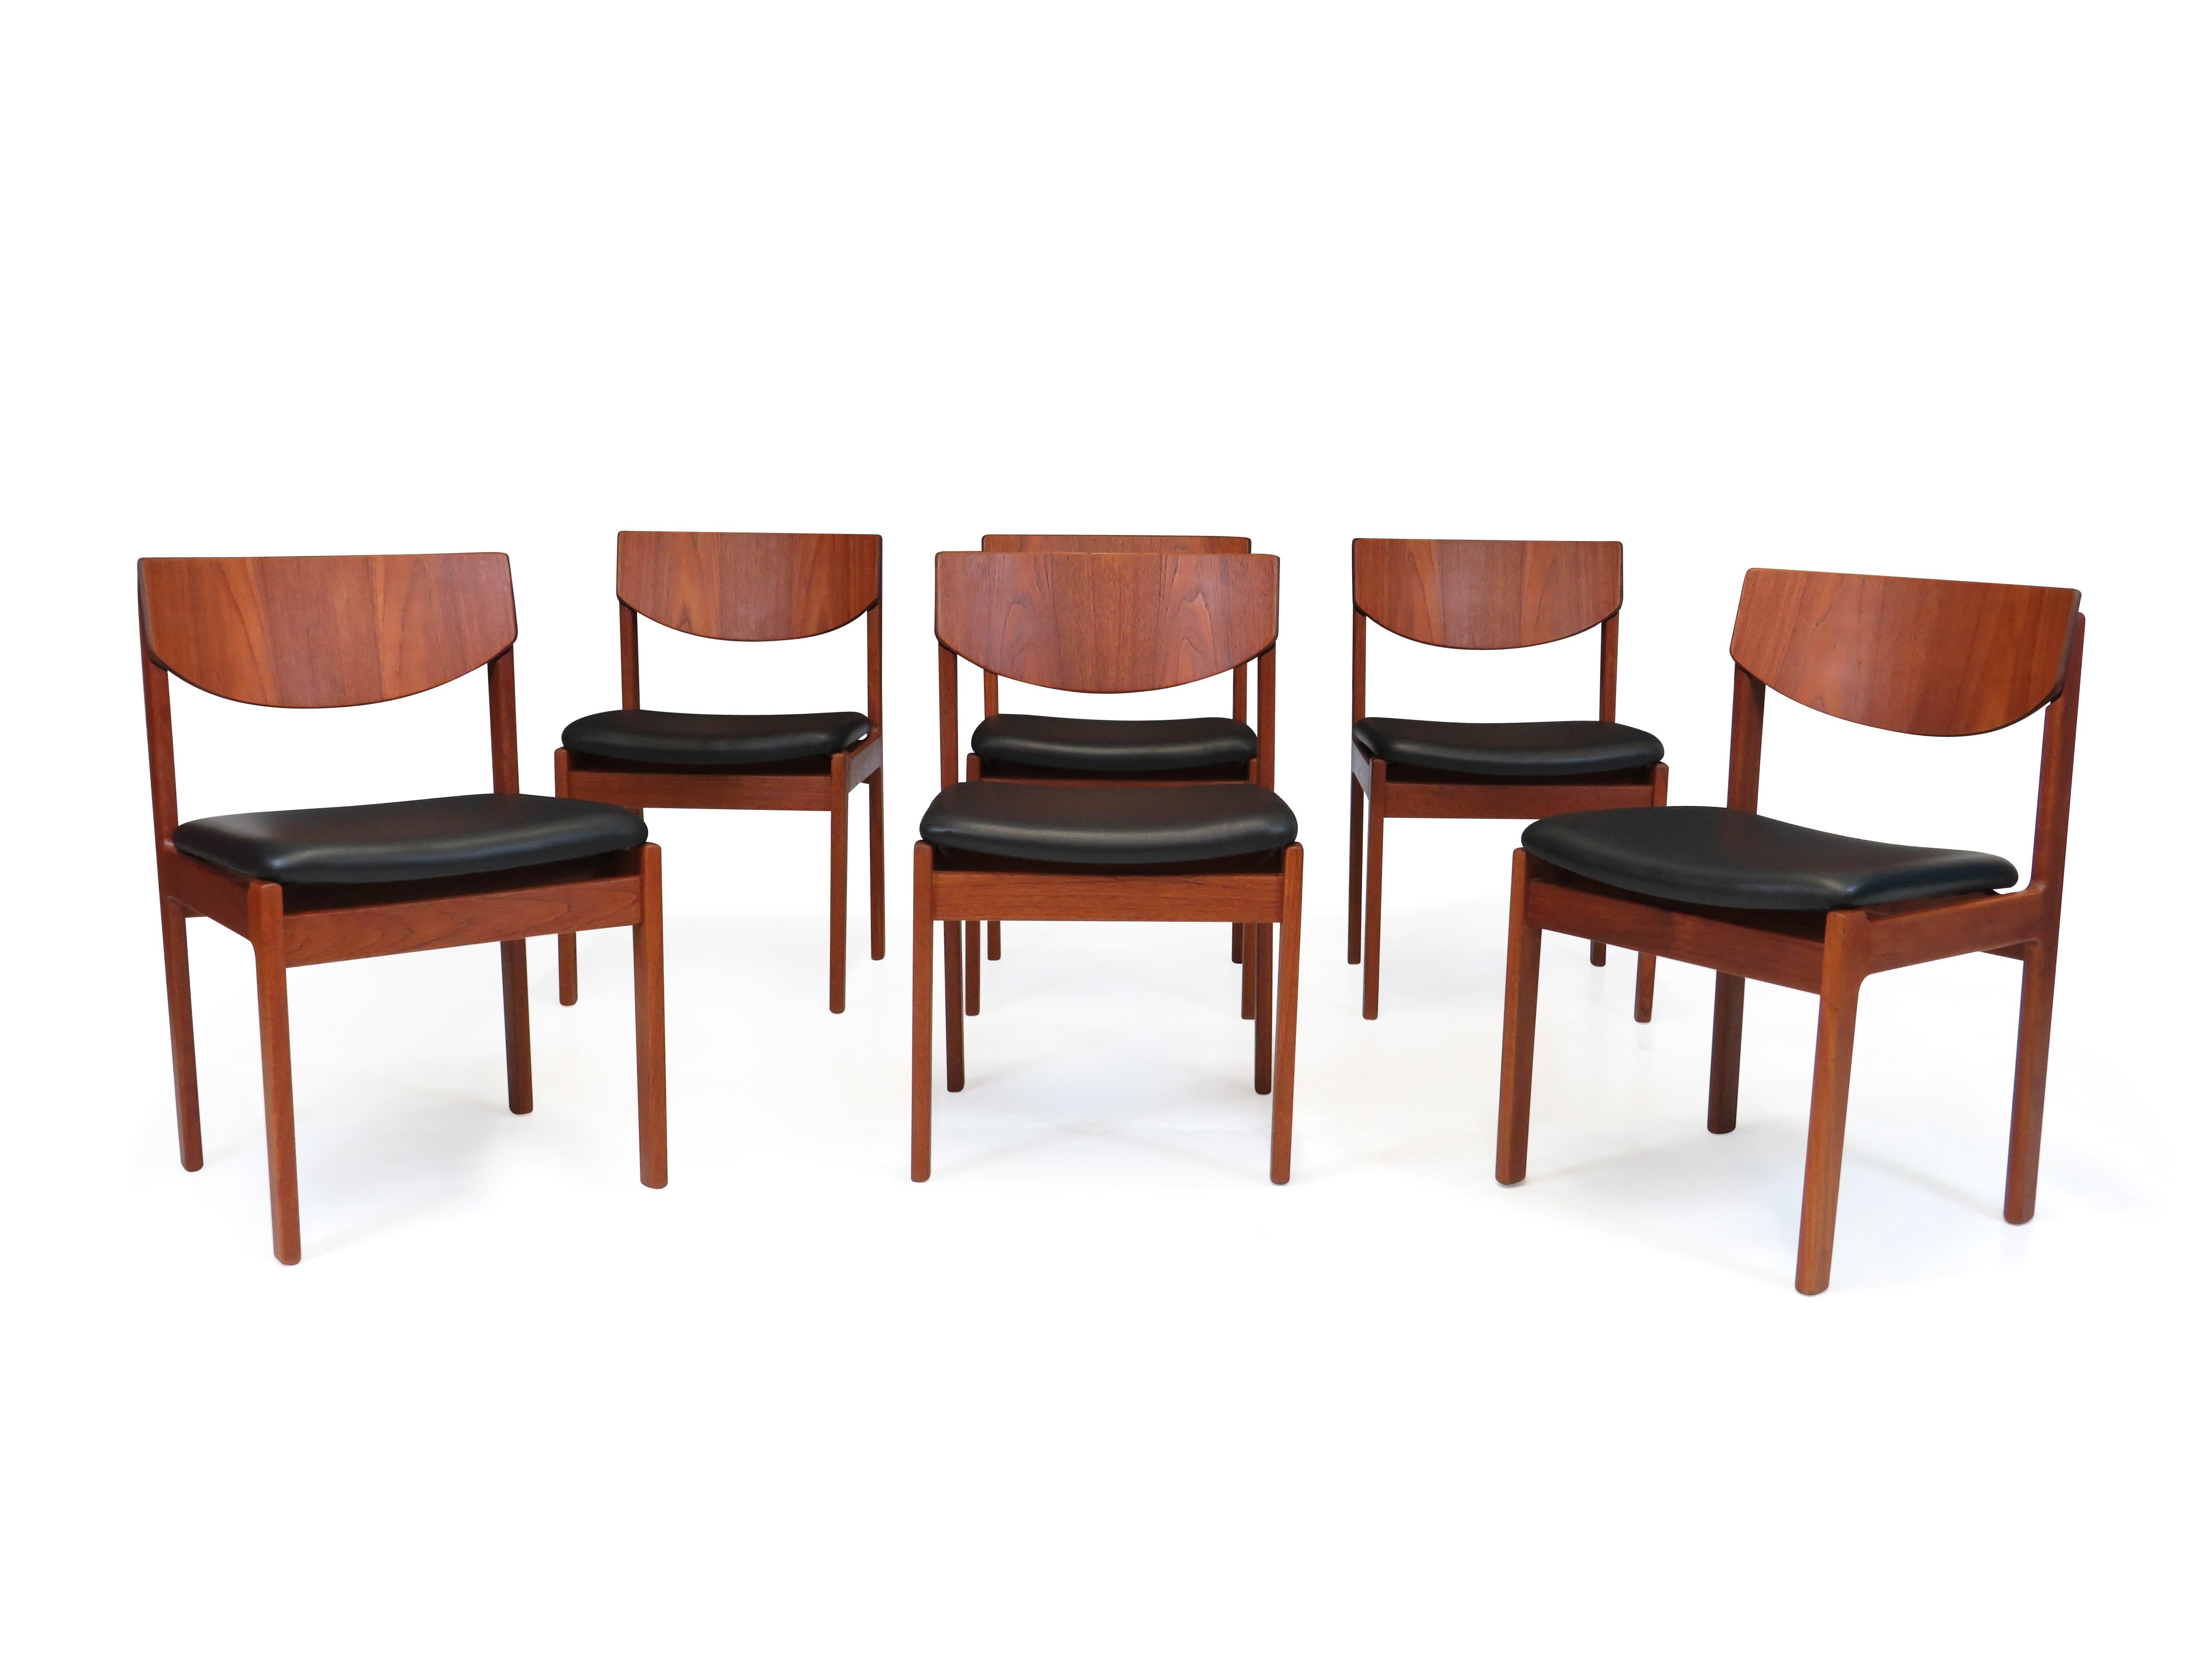 Danish Teak Dining Chairs in New Black Leather For Sale 2